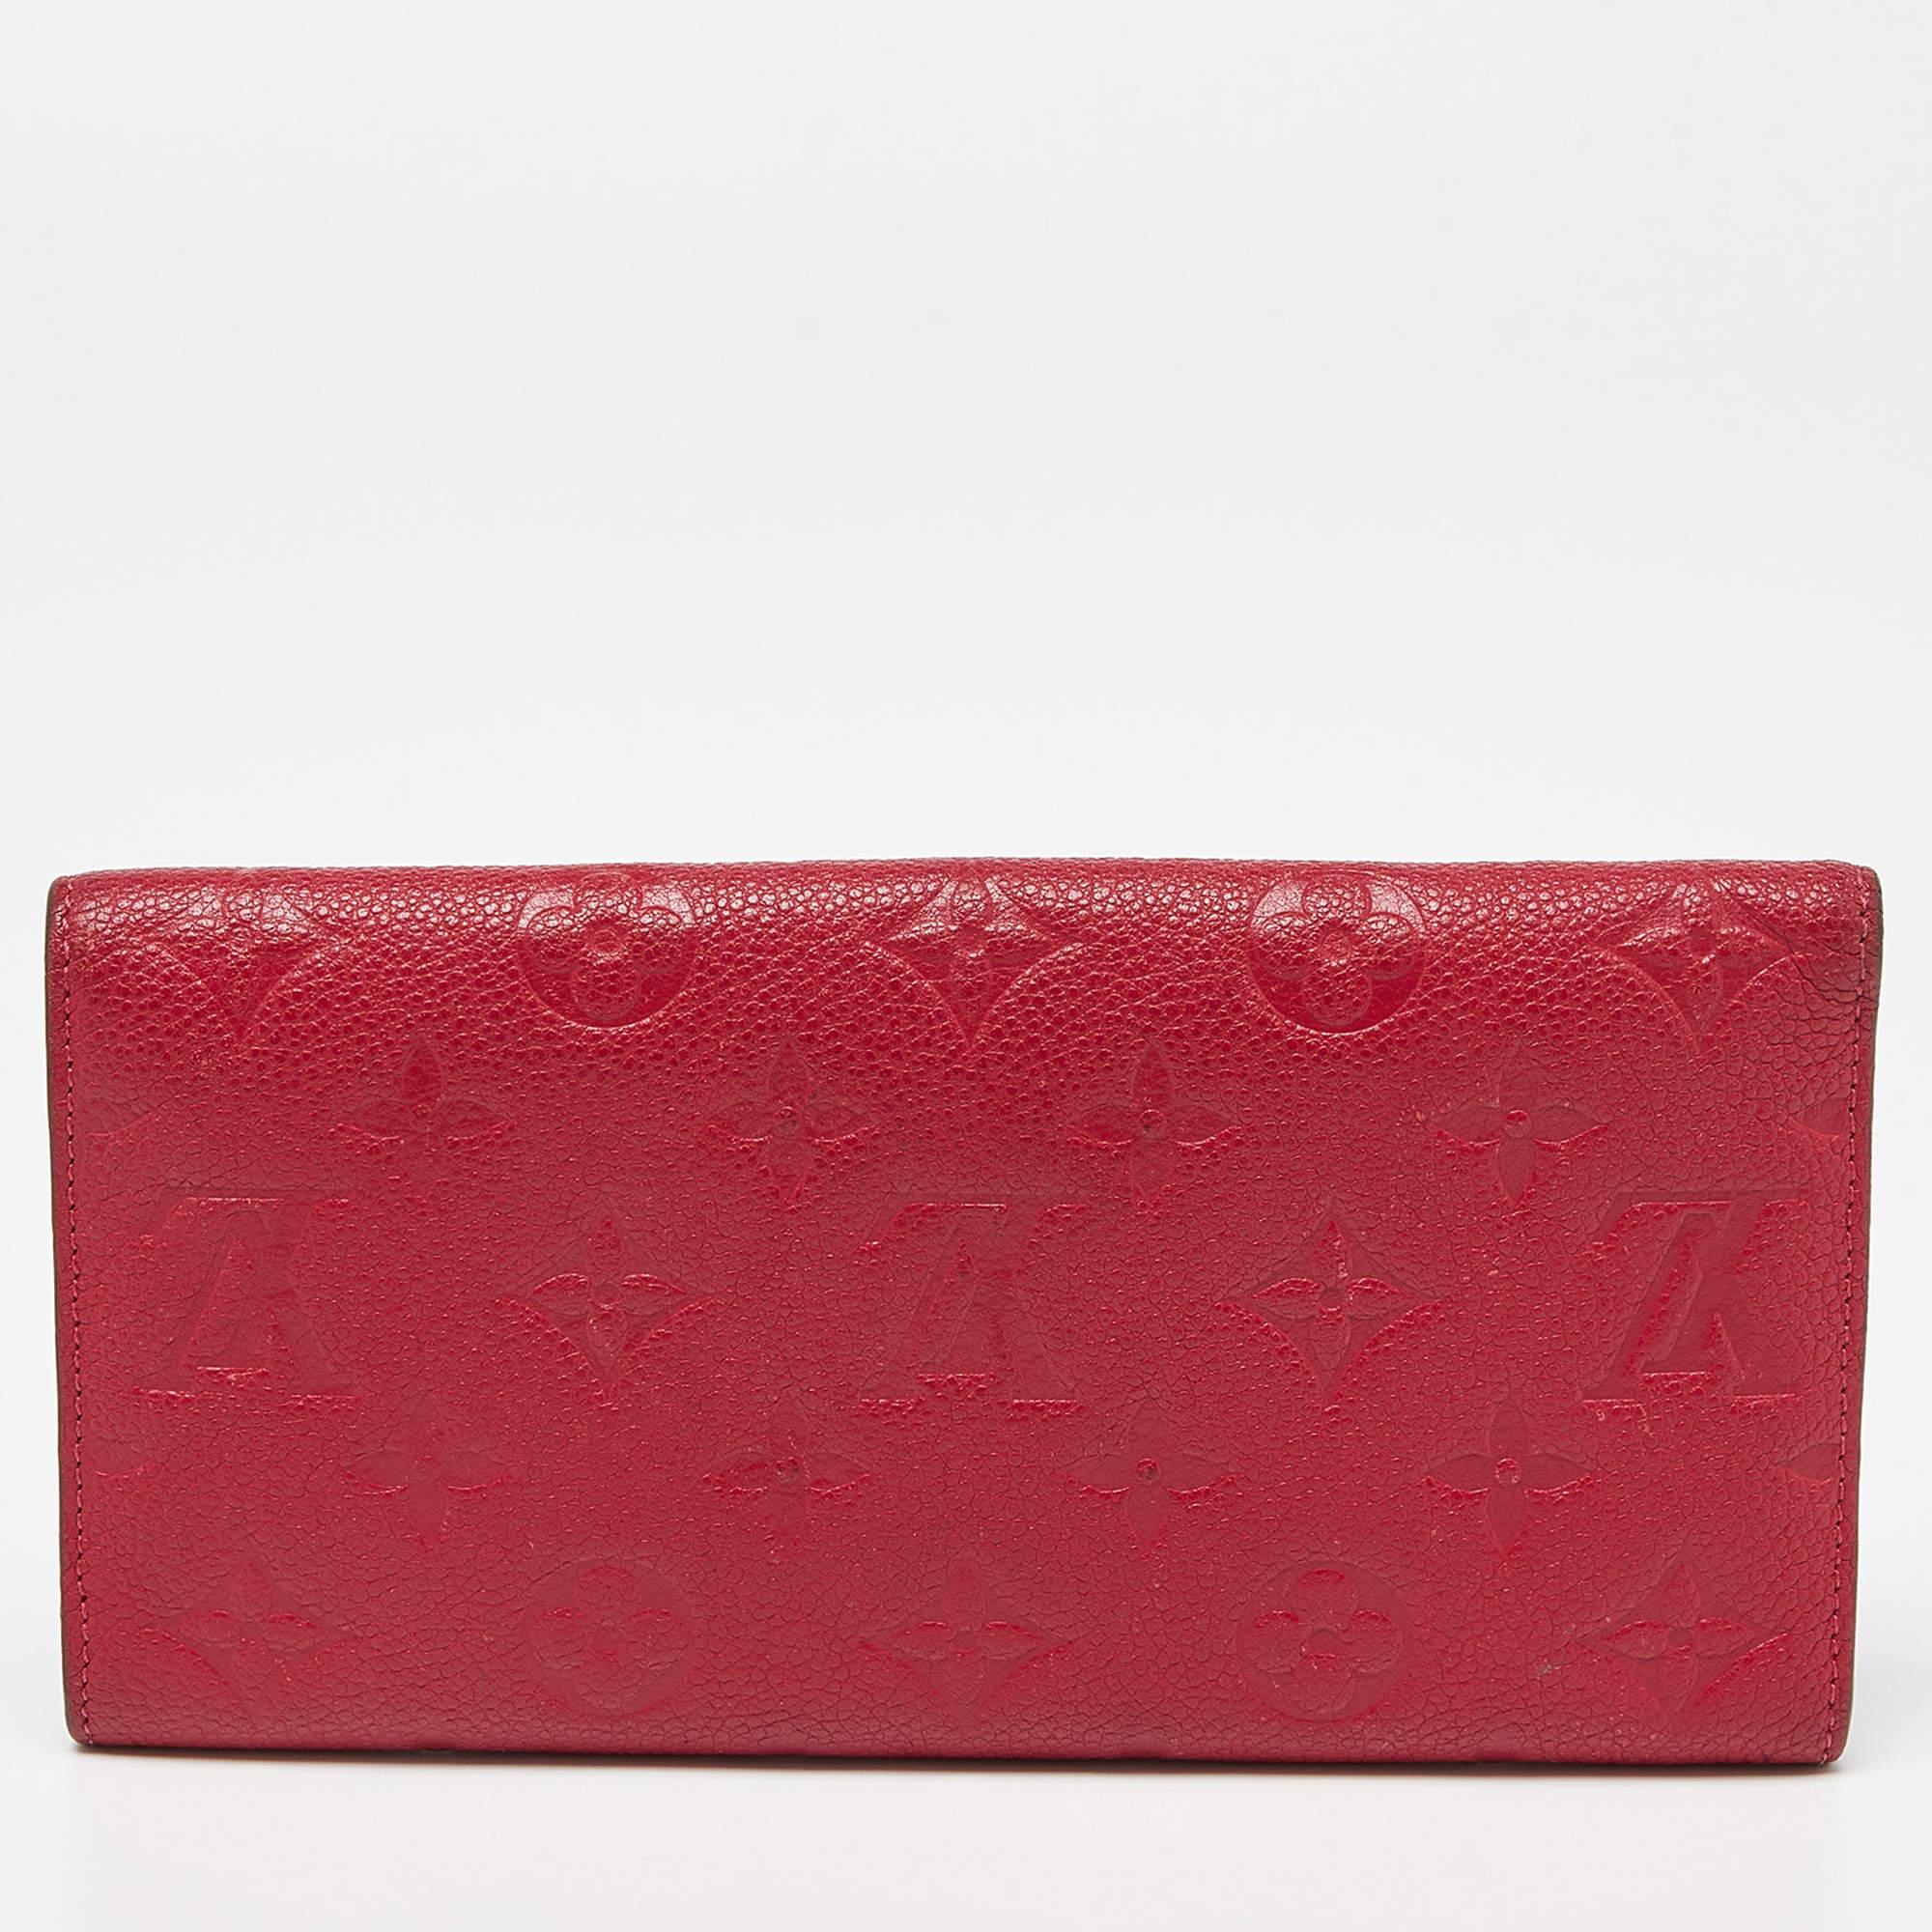 Stylish wallets are a closet must-have! This Curieuse wallet from Louis Vuitton is styled like an envelope and is crafted from Empreinte leather. This sleek wallet comes with multiple card slots and an open slot. It is perfect for daily